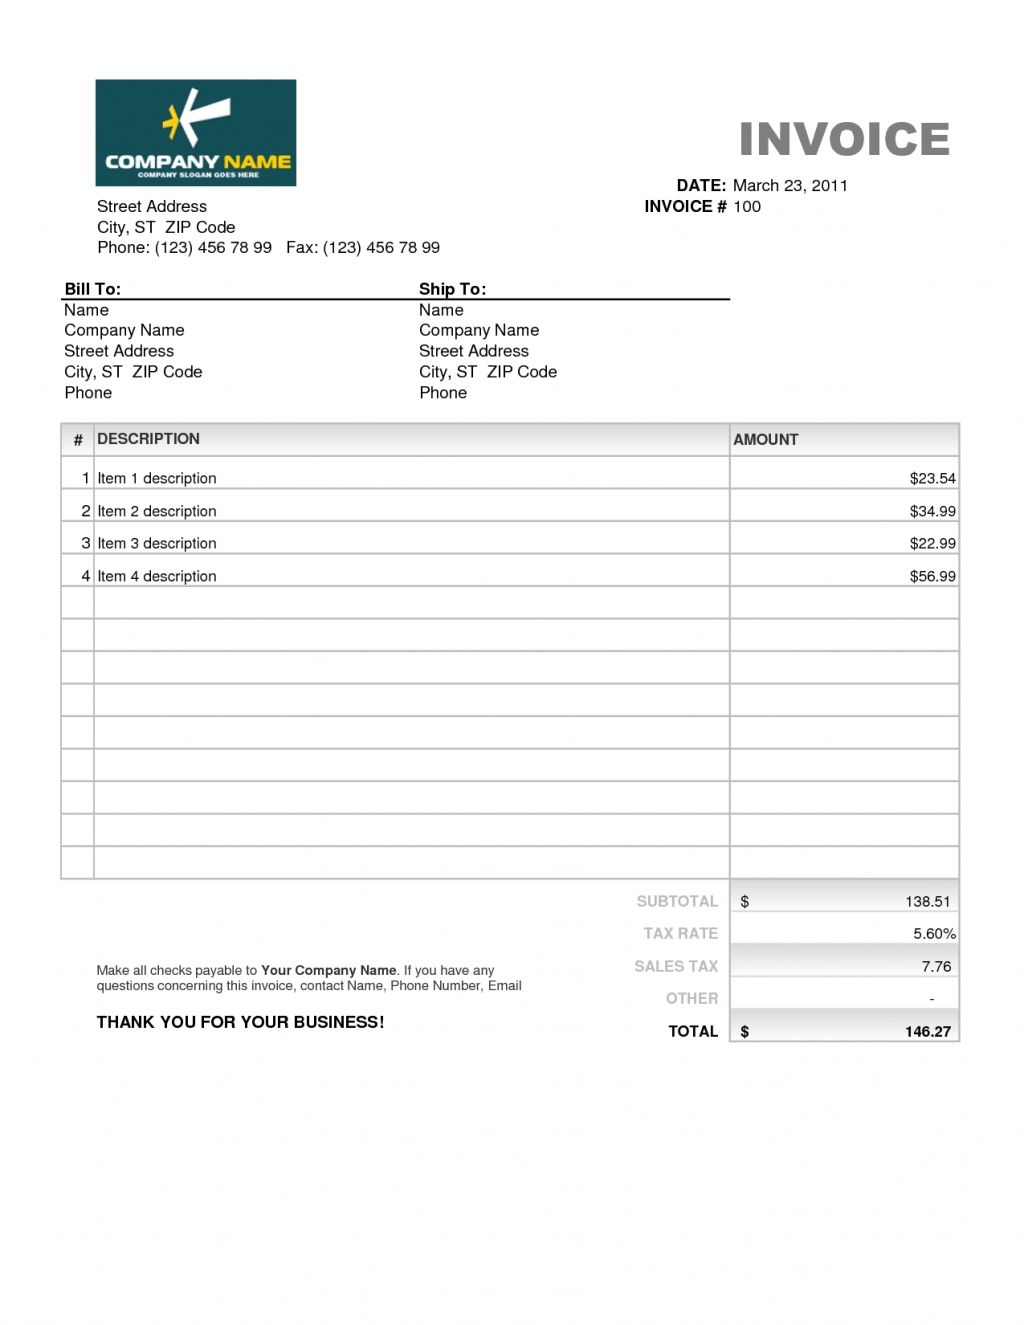 excel invoice template with database sample excel database businessinvoicetemplatexyz 1024 X 1325